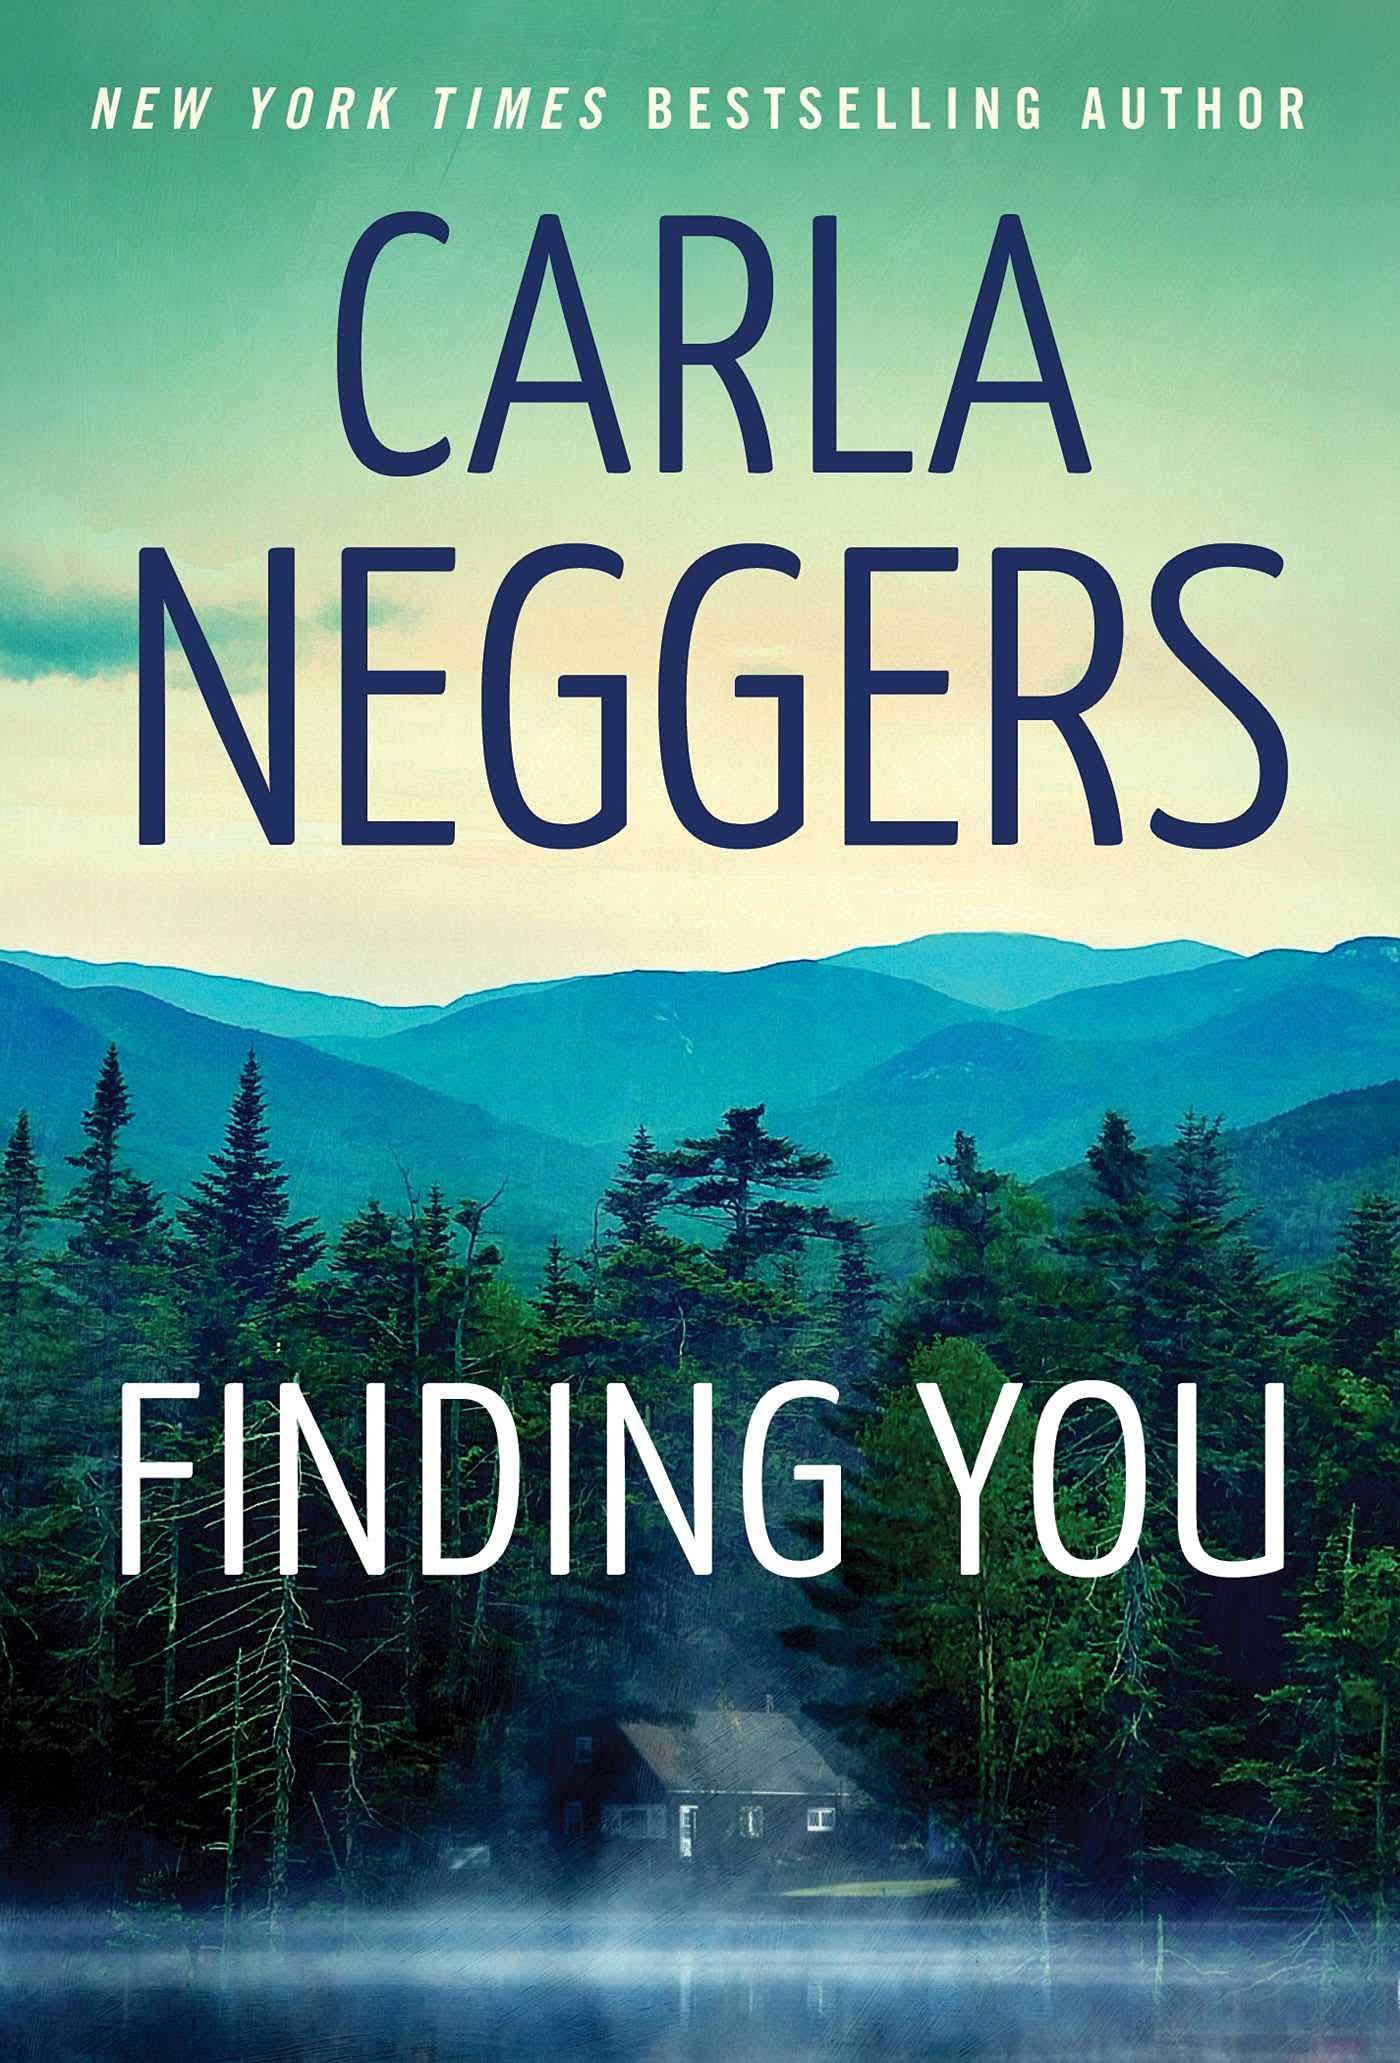 Finding You by Carla Neggers